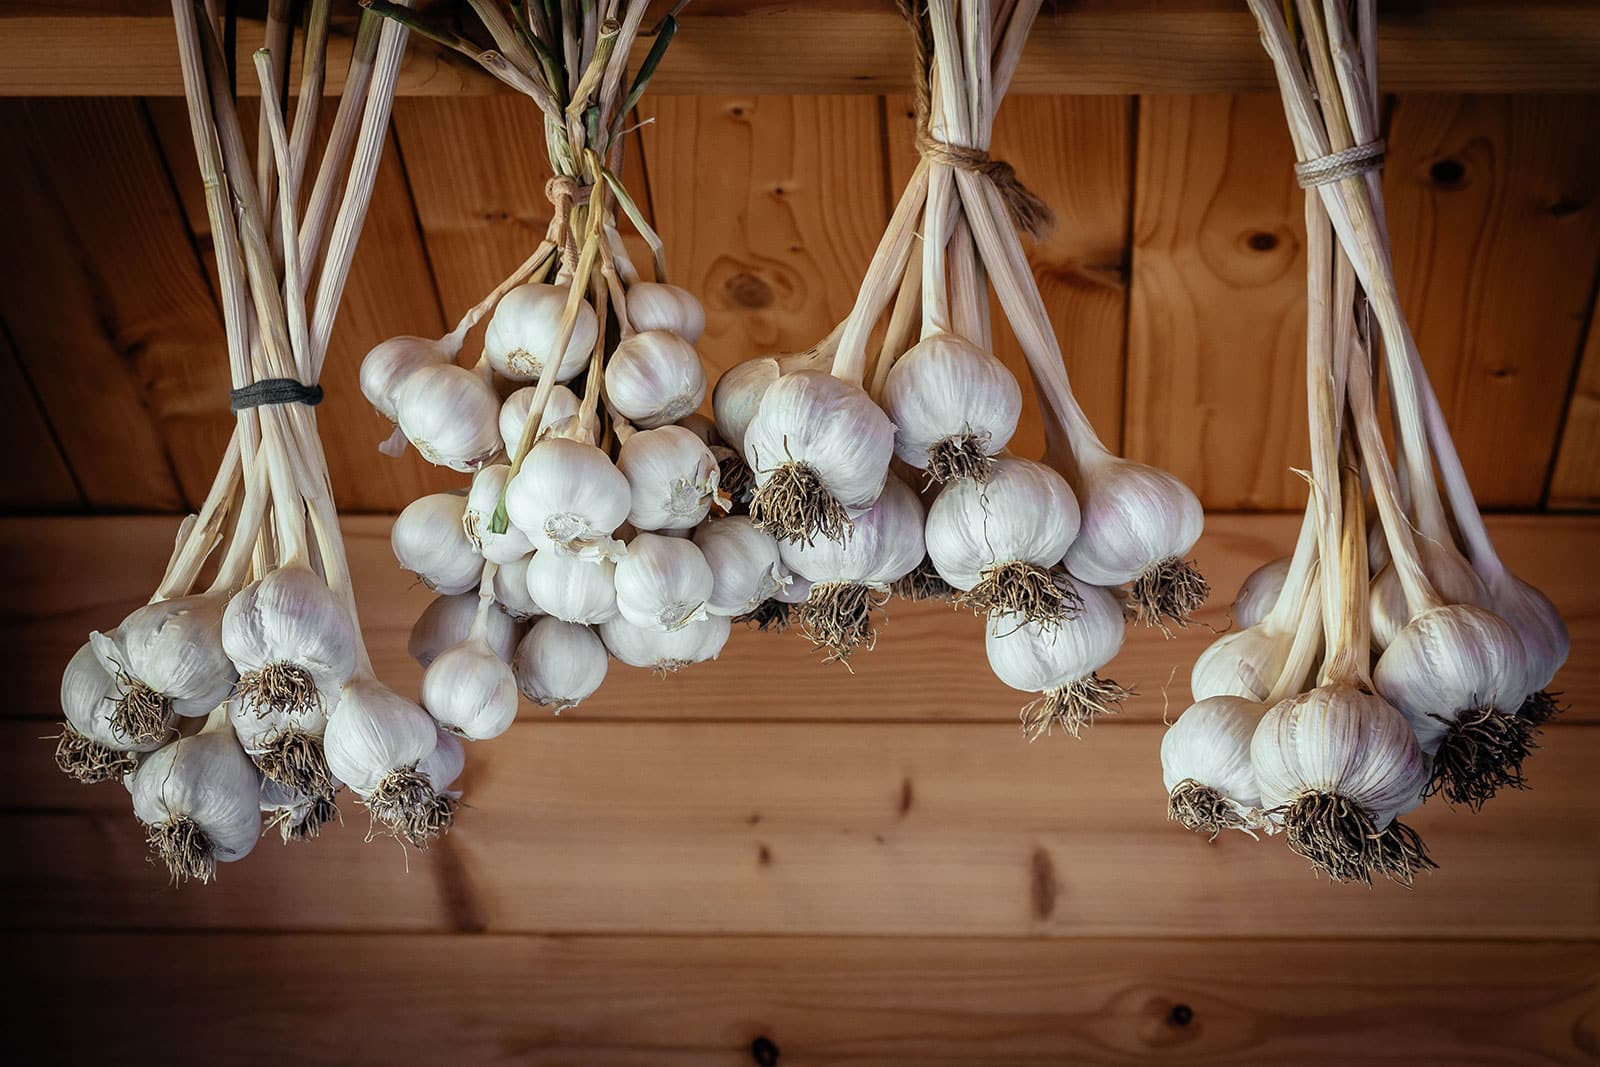 Hardneck garlic bundles tied together and hanging from the ceiling in storage